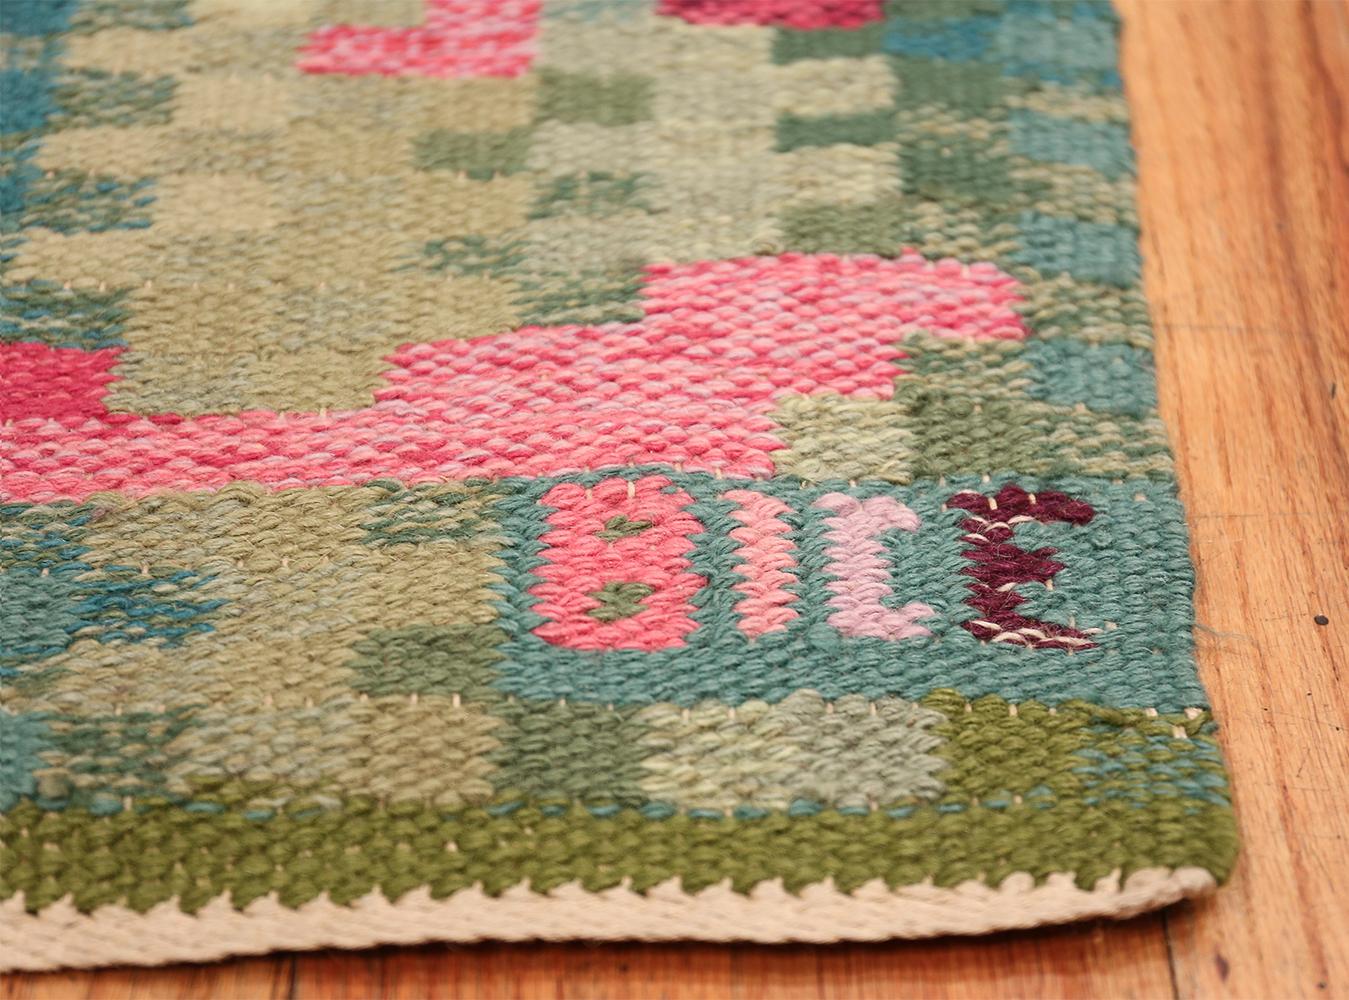 Hand-Woven Vintage Scandinavian Runner Signed BICE. Size: 3 ft 5 in x 11 ft 2 in